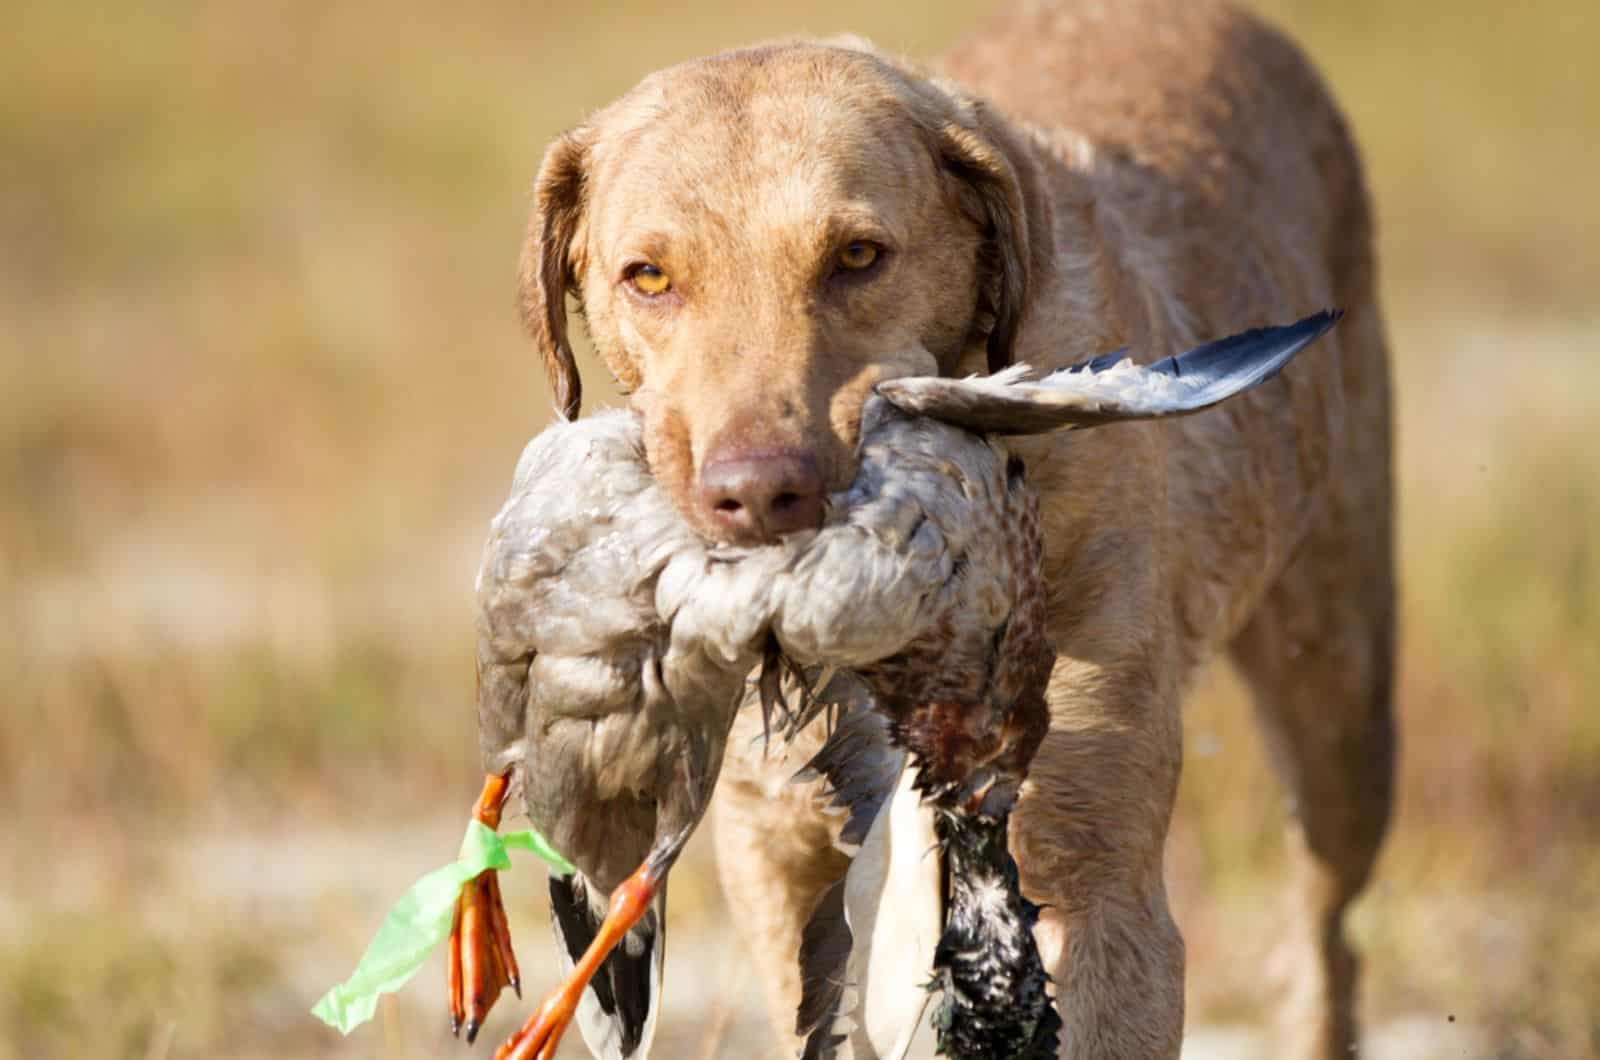 shesapeake bay retriever with wounded birth in his mouth